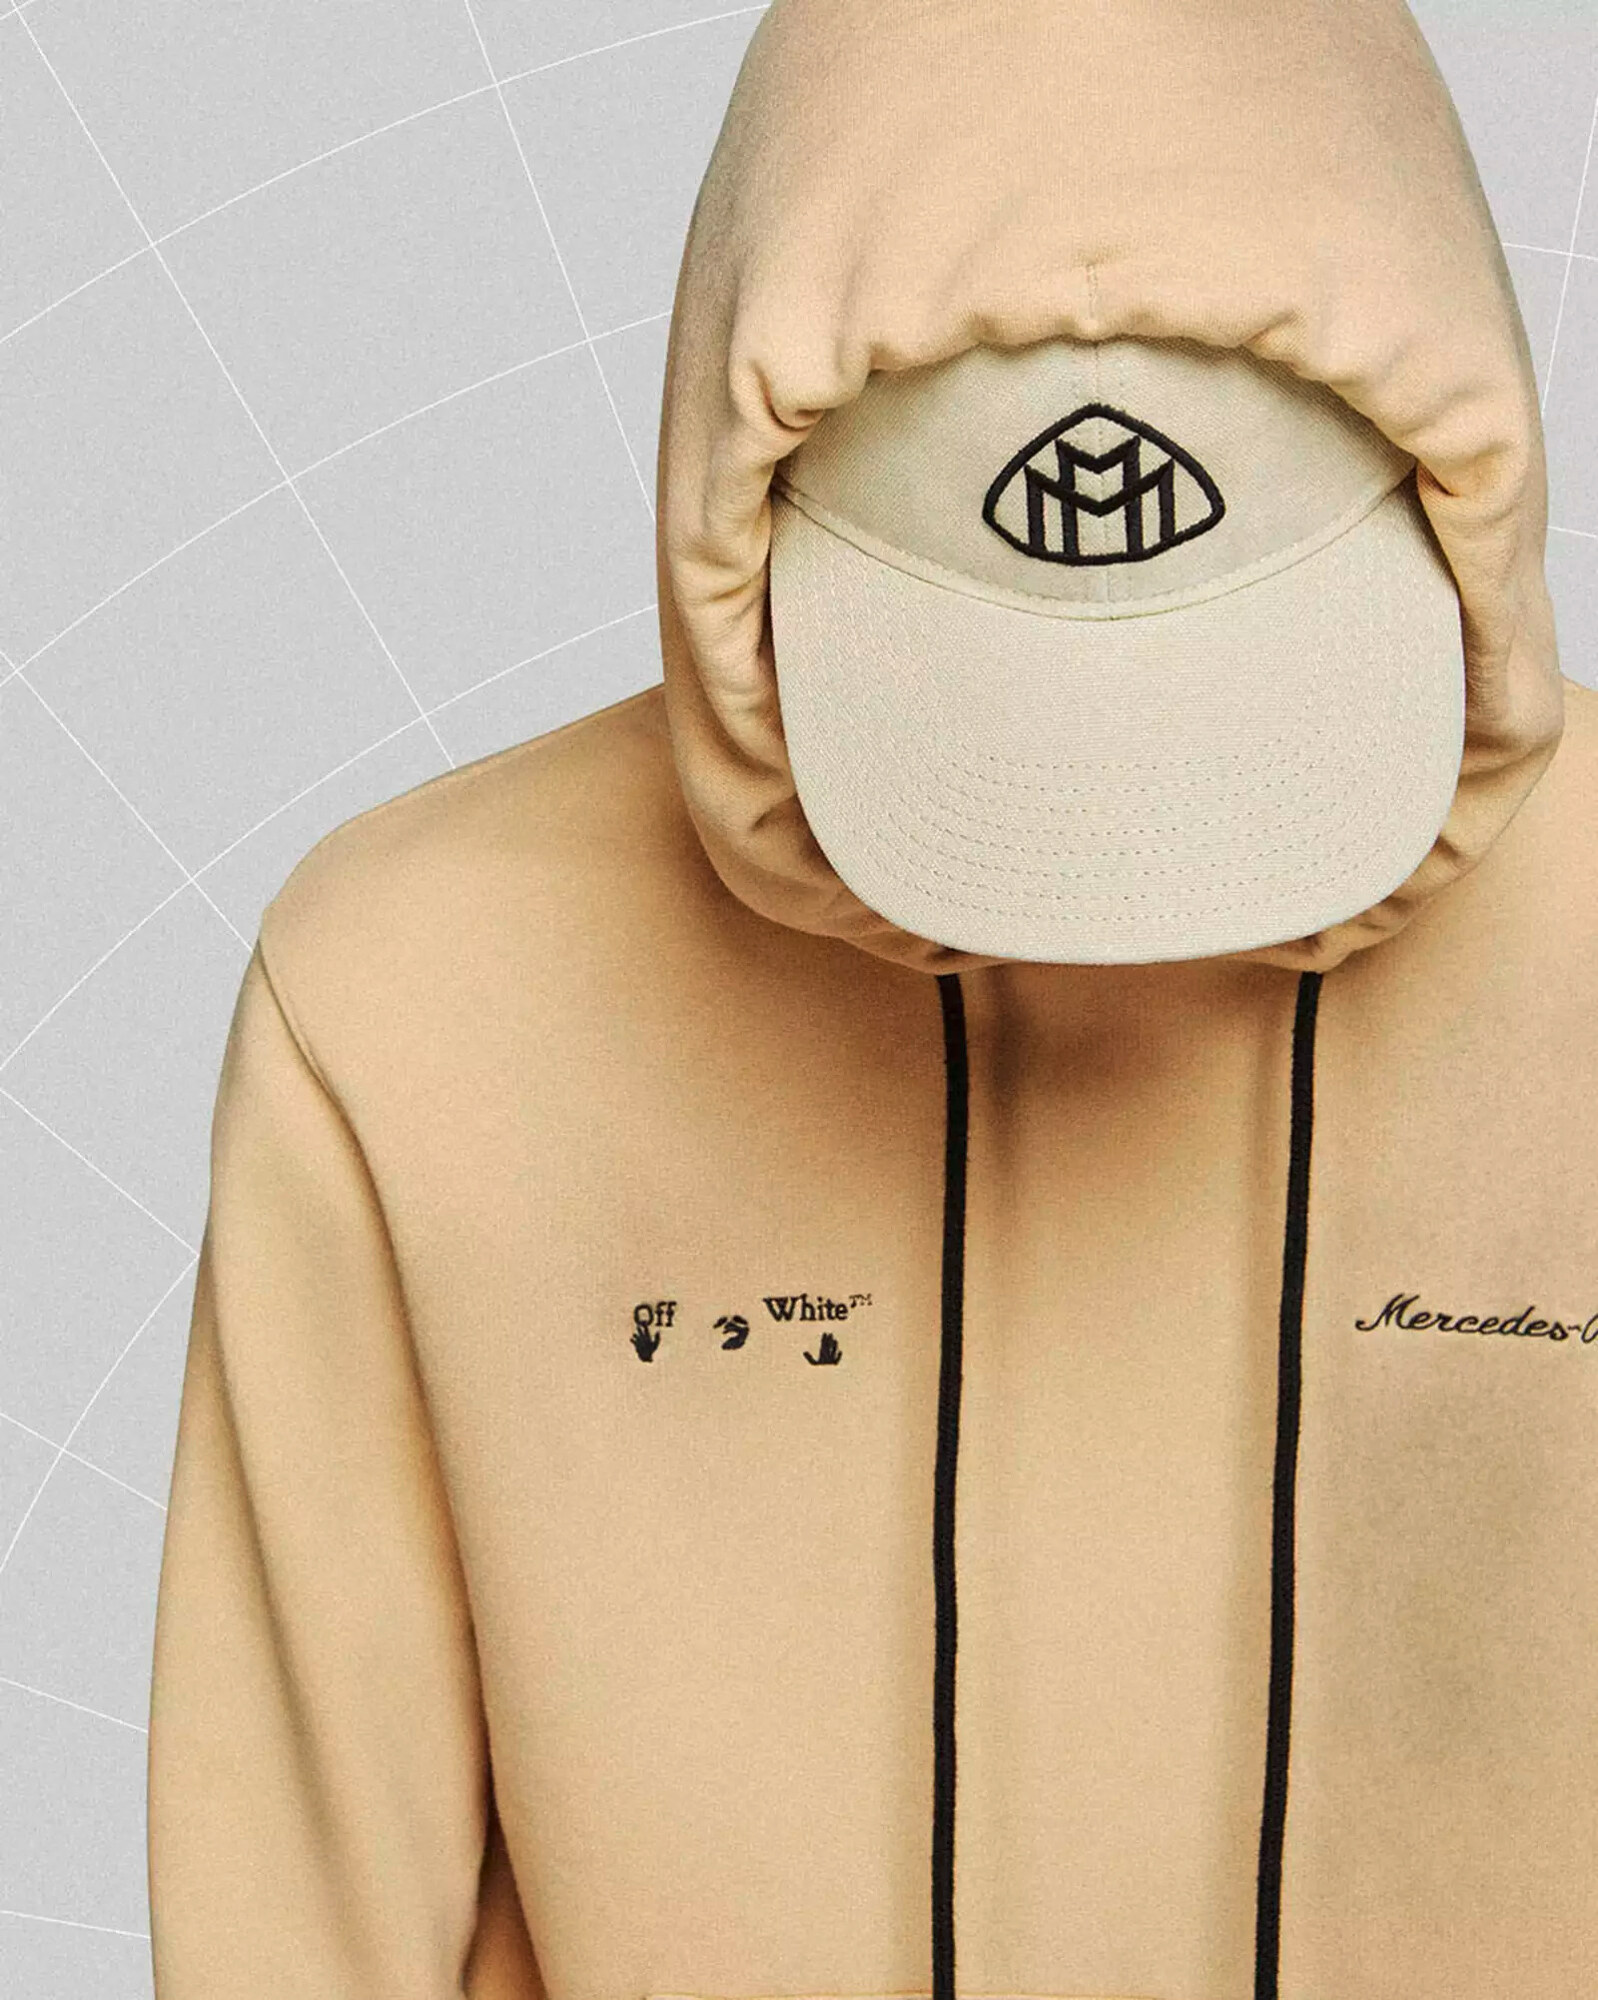 Mercedes-Maybach Virgil Abloh capsule collection